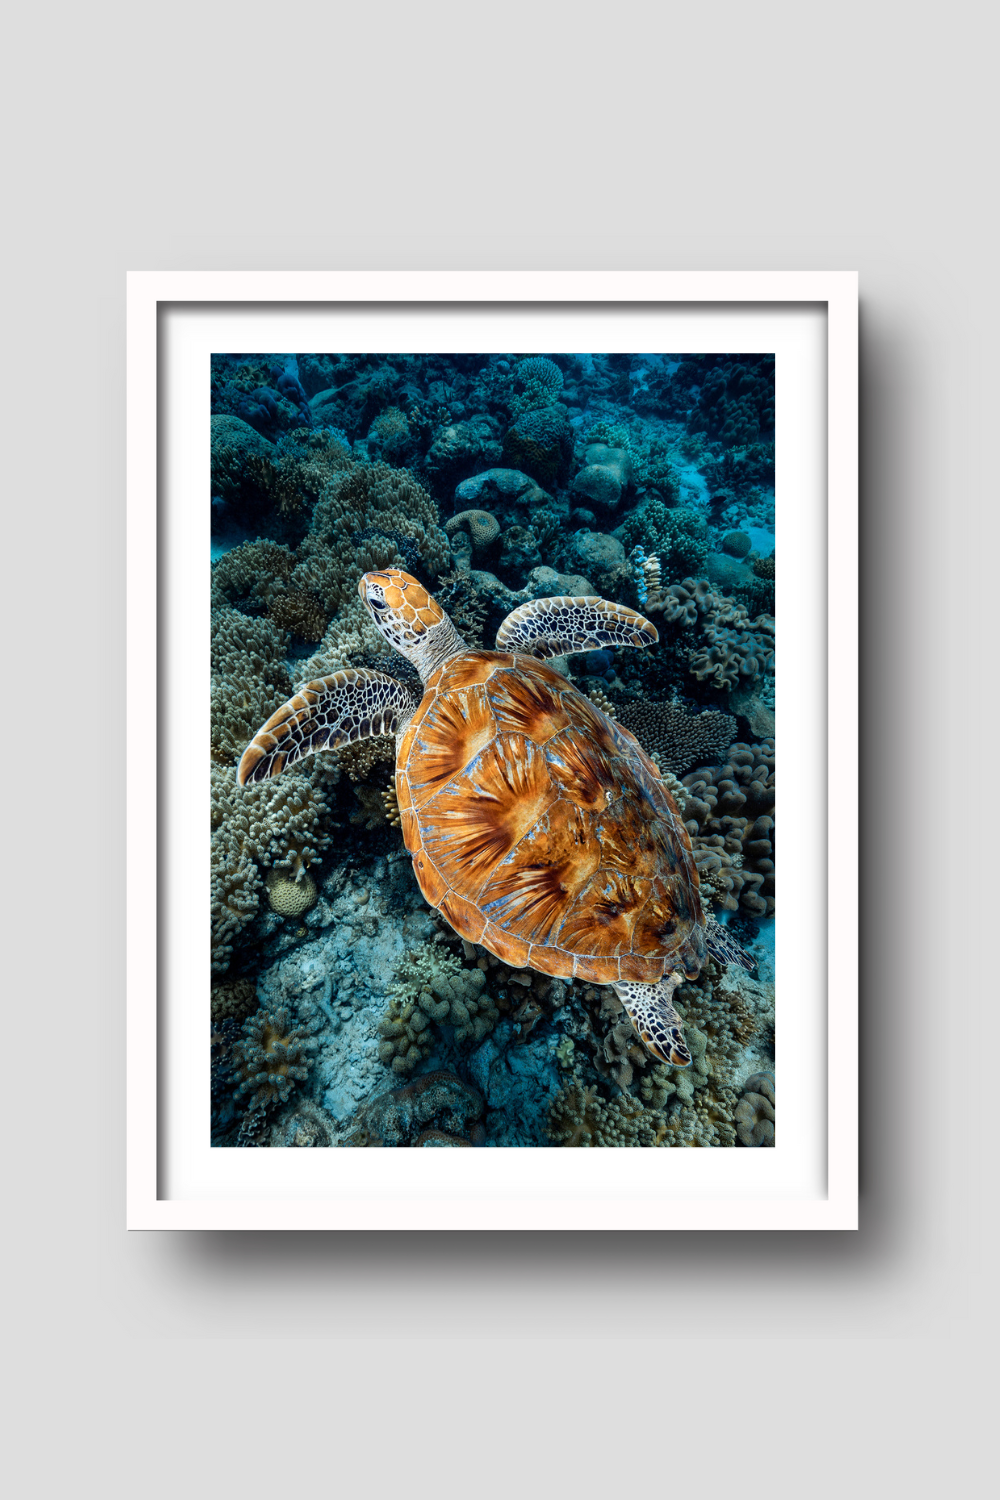 sea turtle with splashes of vibrant blue colour on his shell gliding across a bed of reef